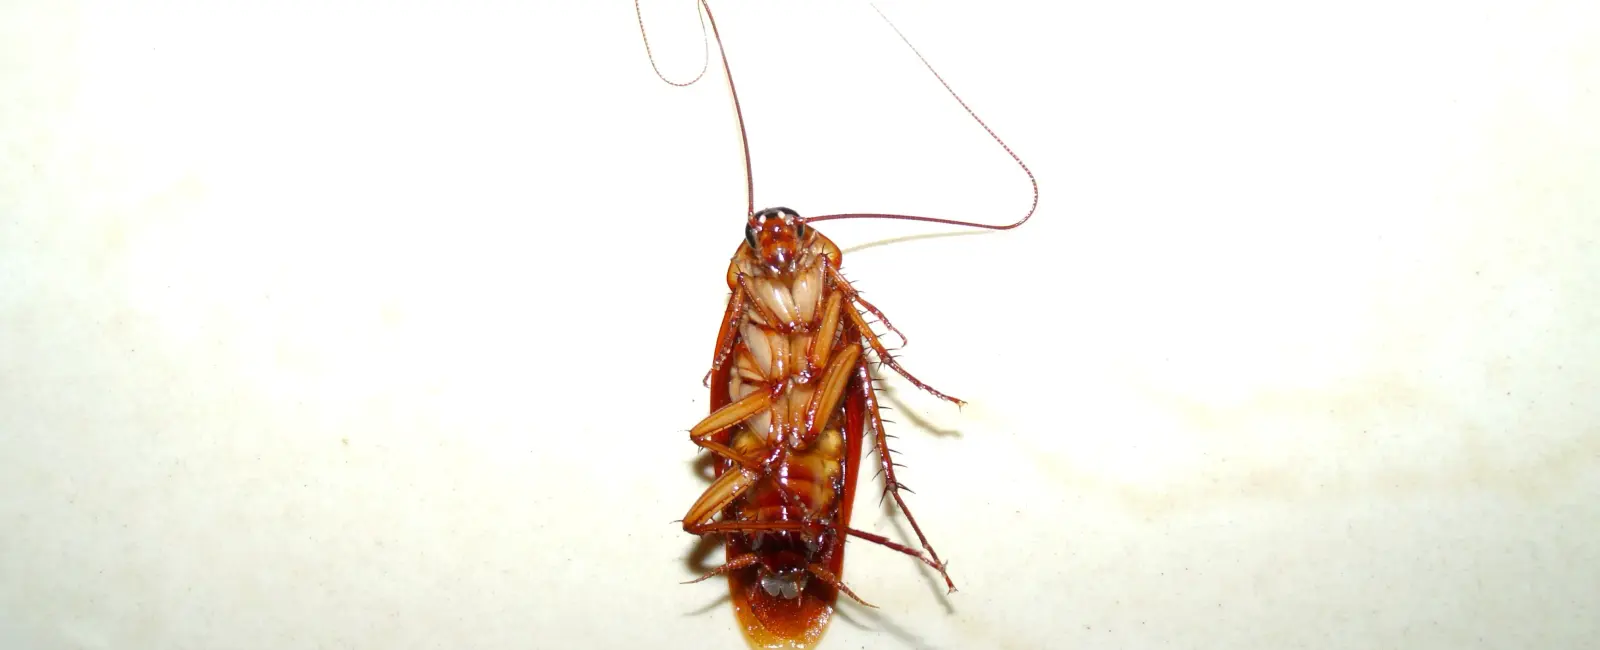 Headless cockroaches are capable of living for weeks they die from starvation